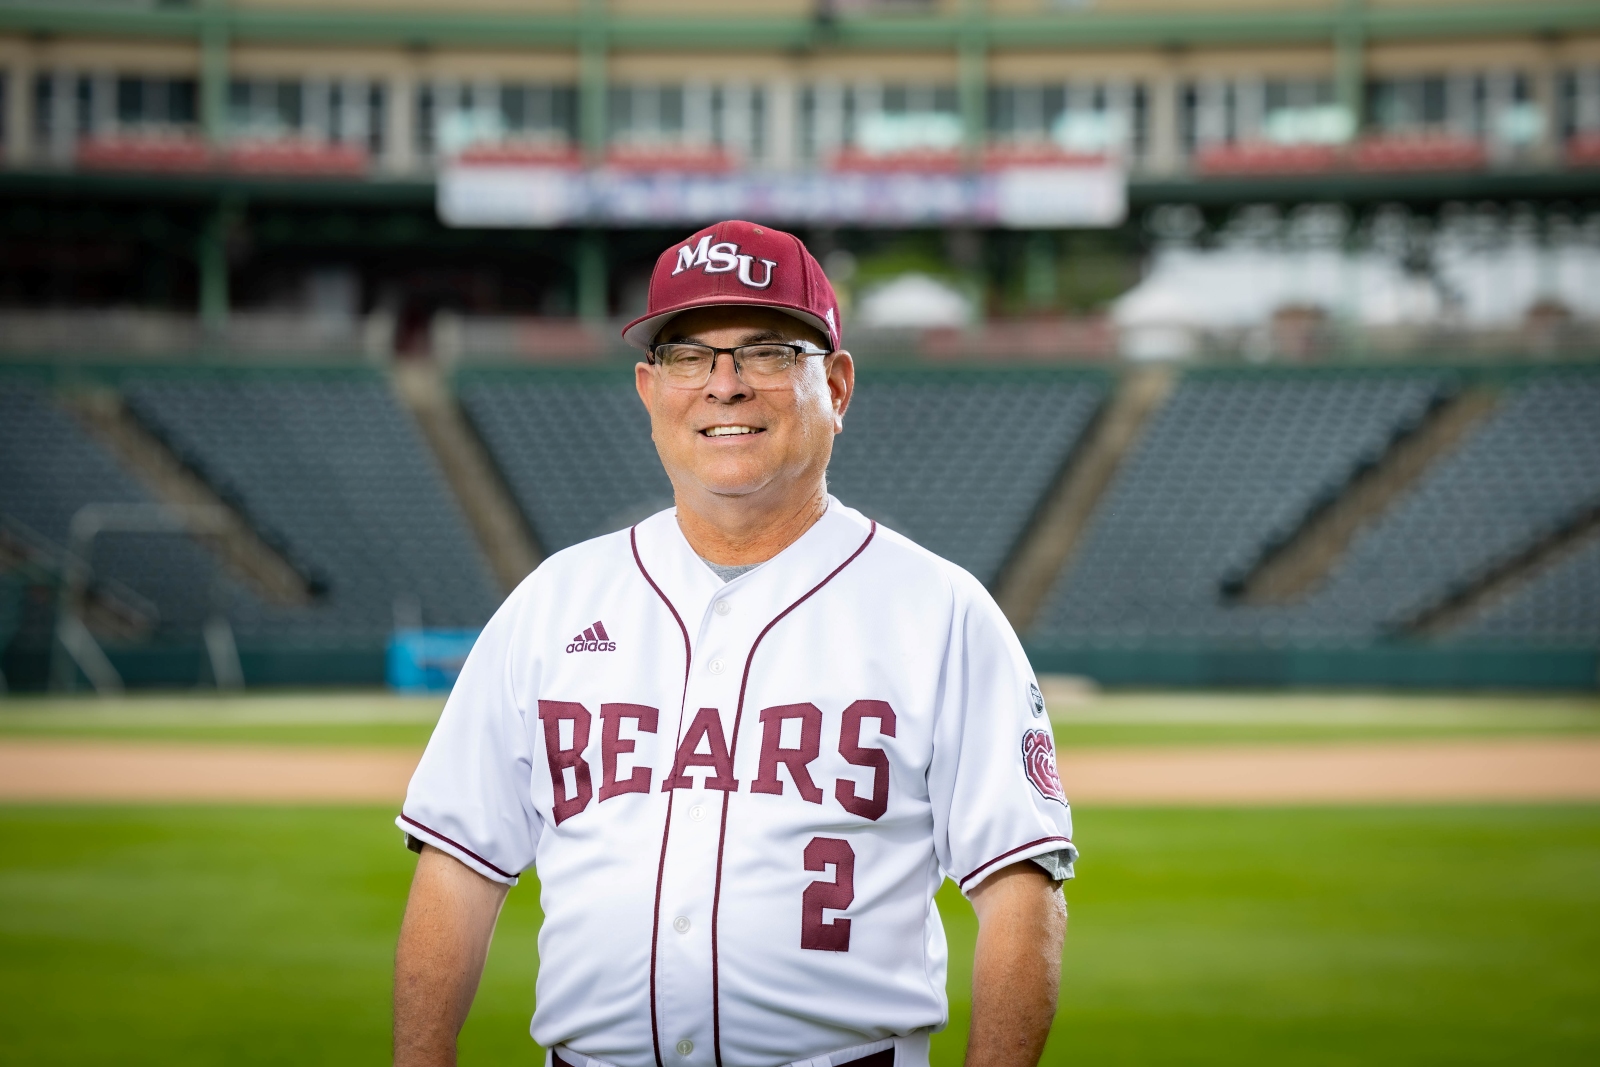 Missouri State baseball coach Keith Guttin, wearing a Bears uniform, poses for a picture on the outfield at Hammons Field